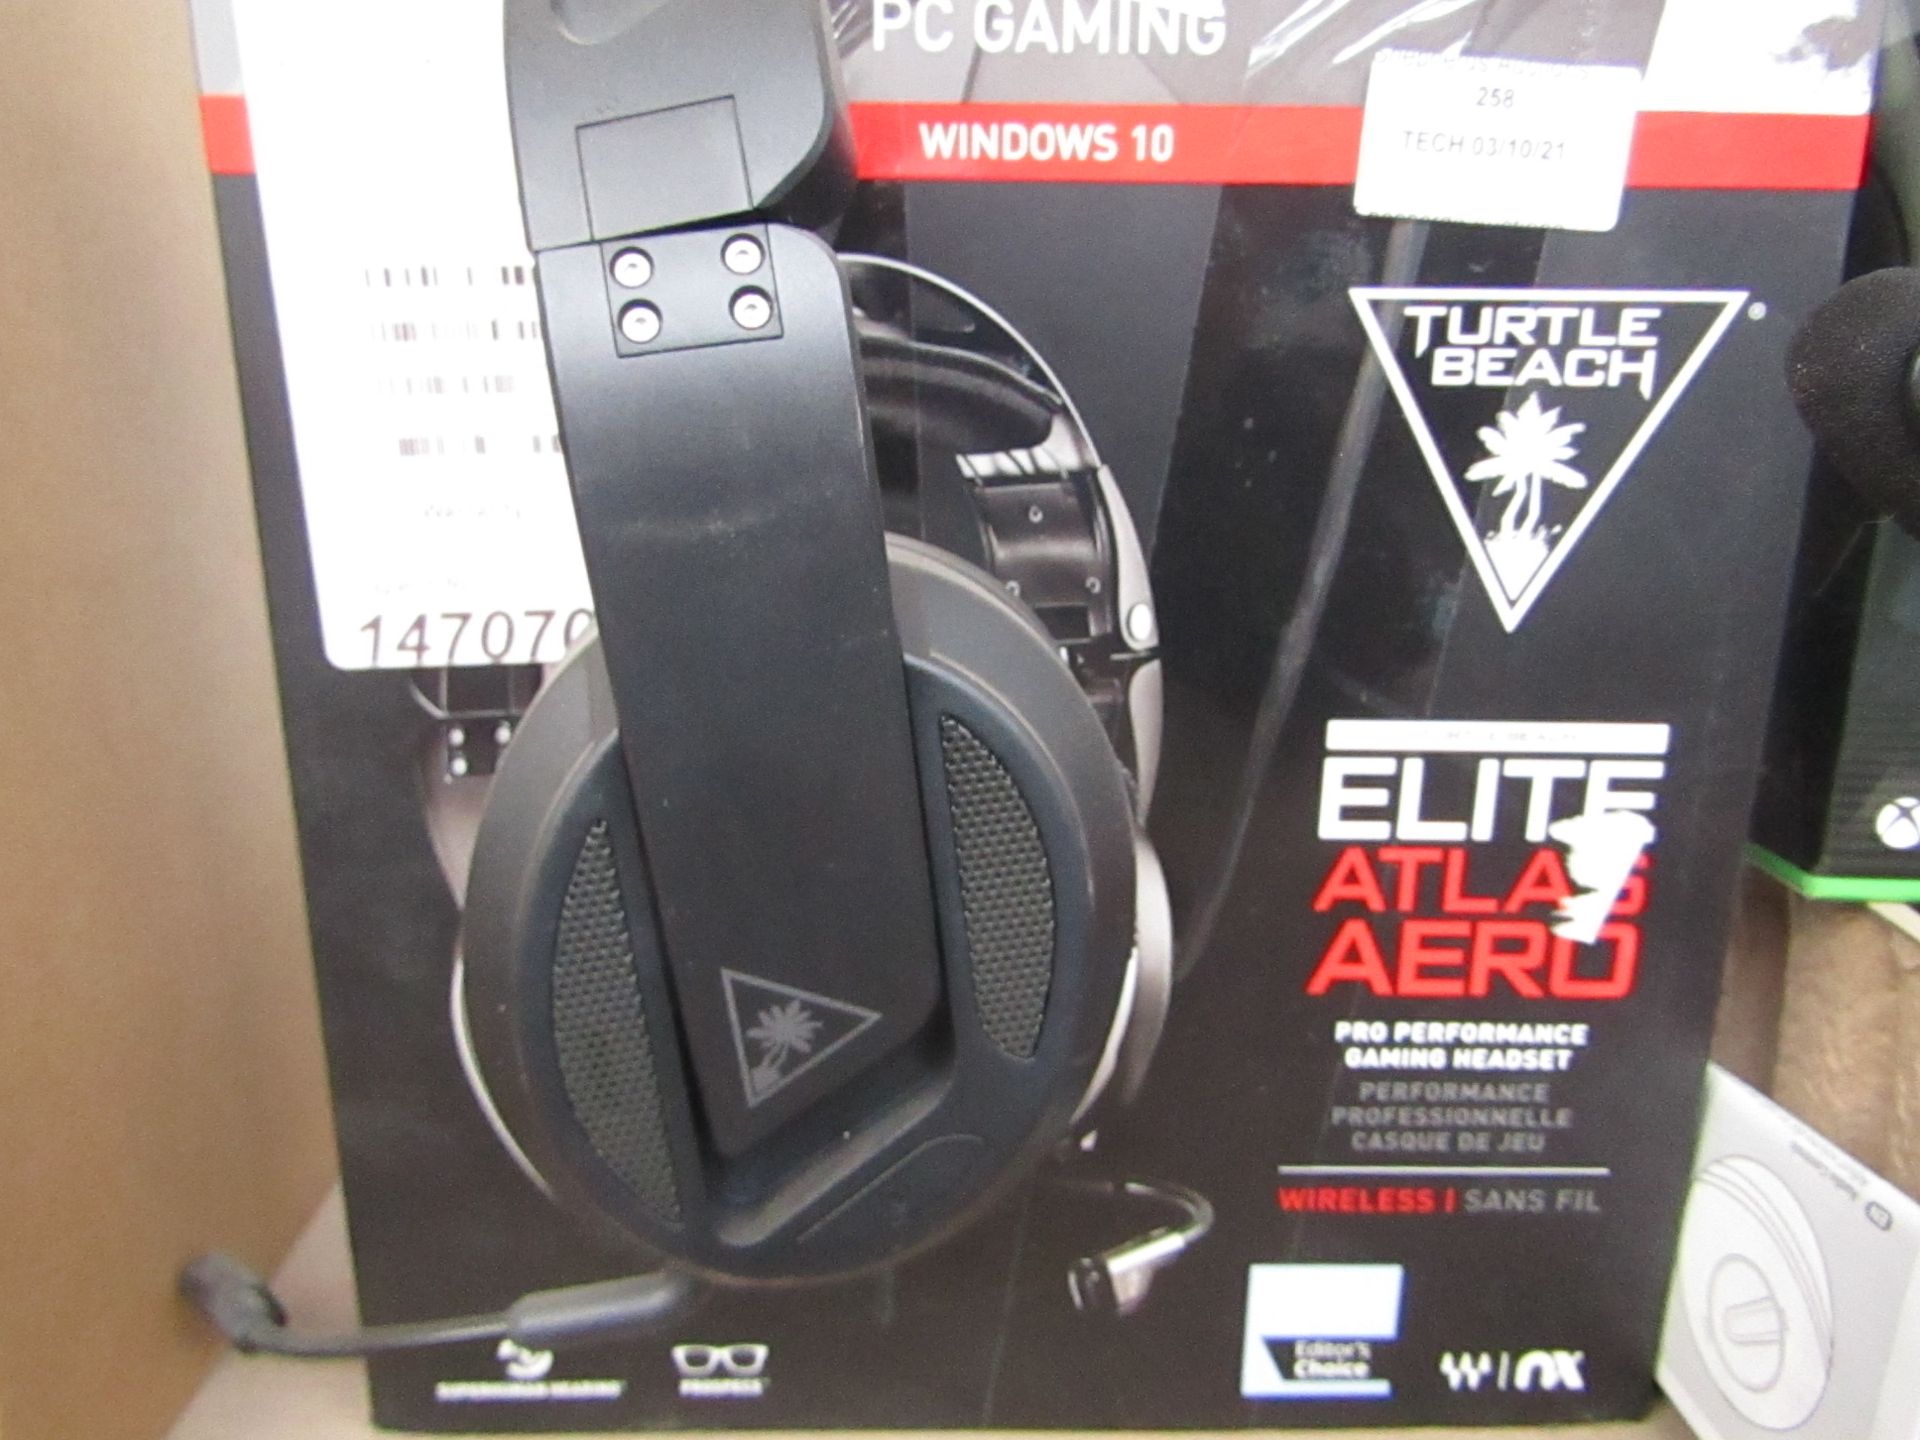 Turtle Beach Elite Atlas Aero Pro Gaming Headset for PC - Untested & Boxed - RRP £90